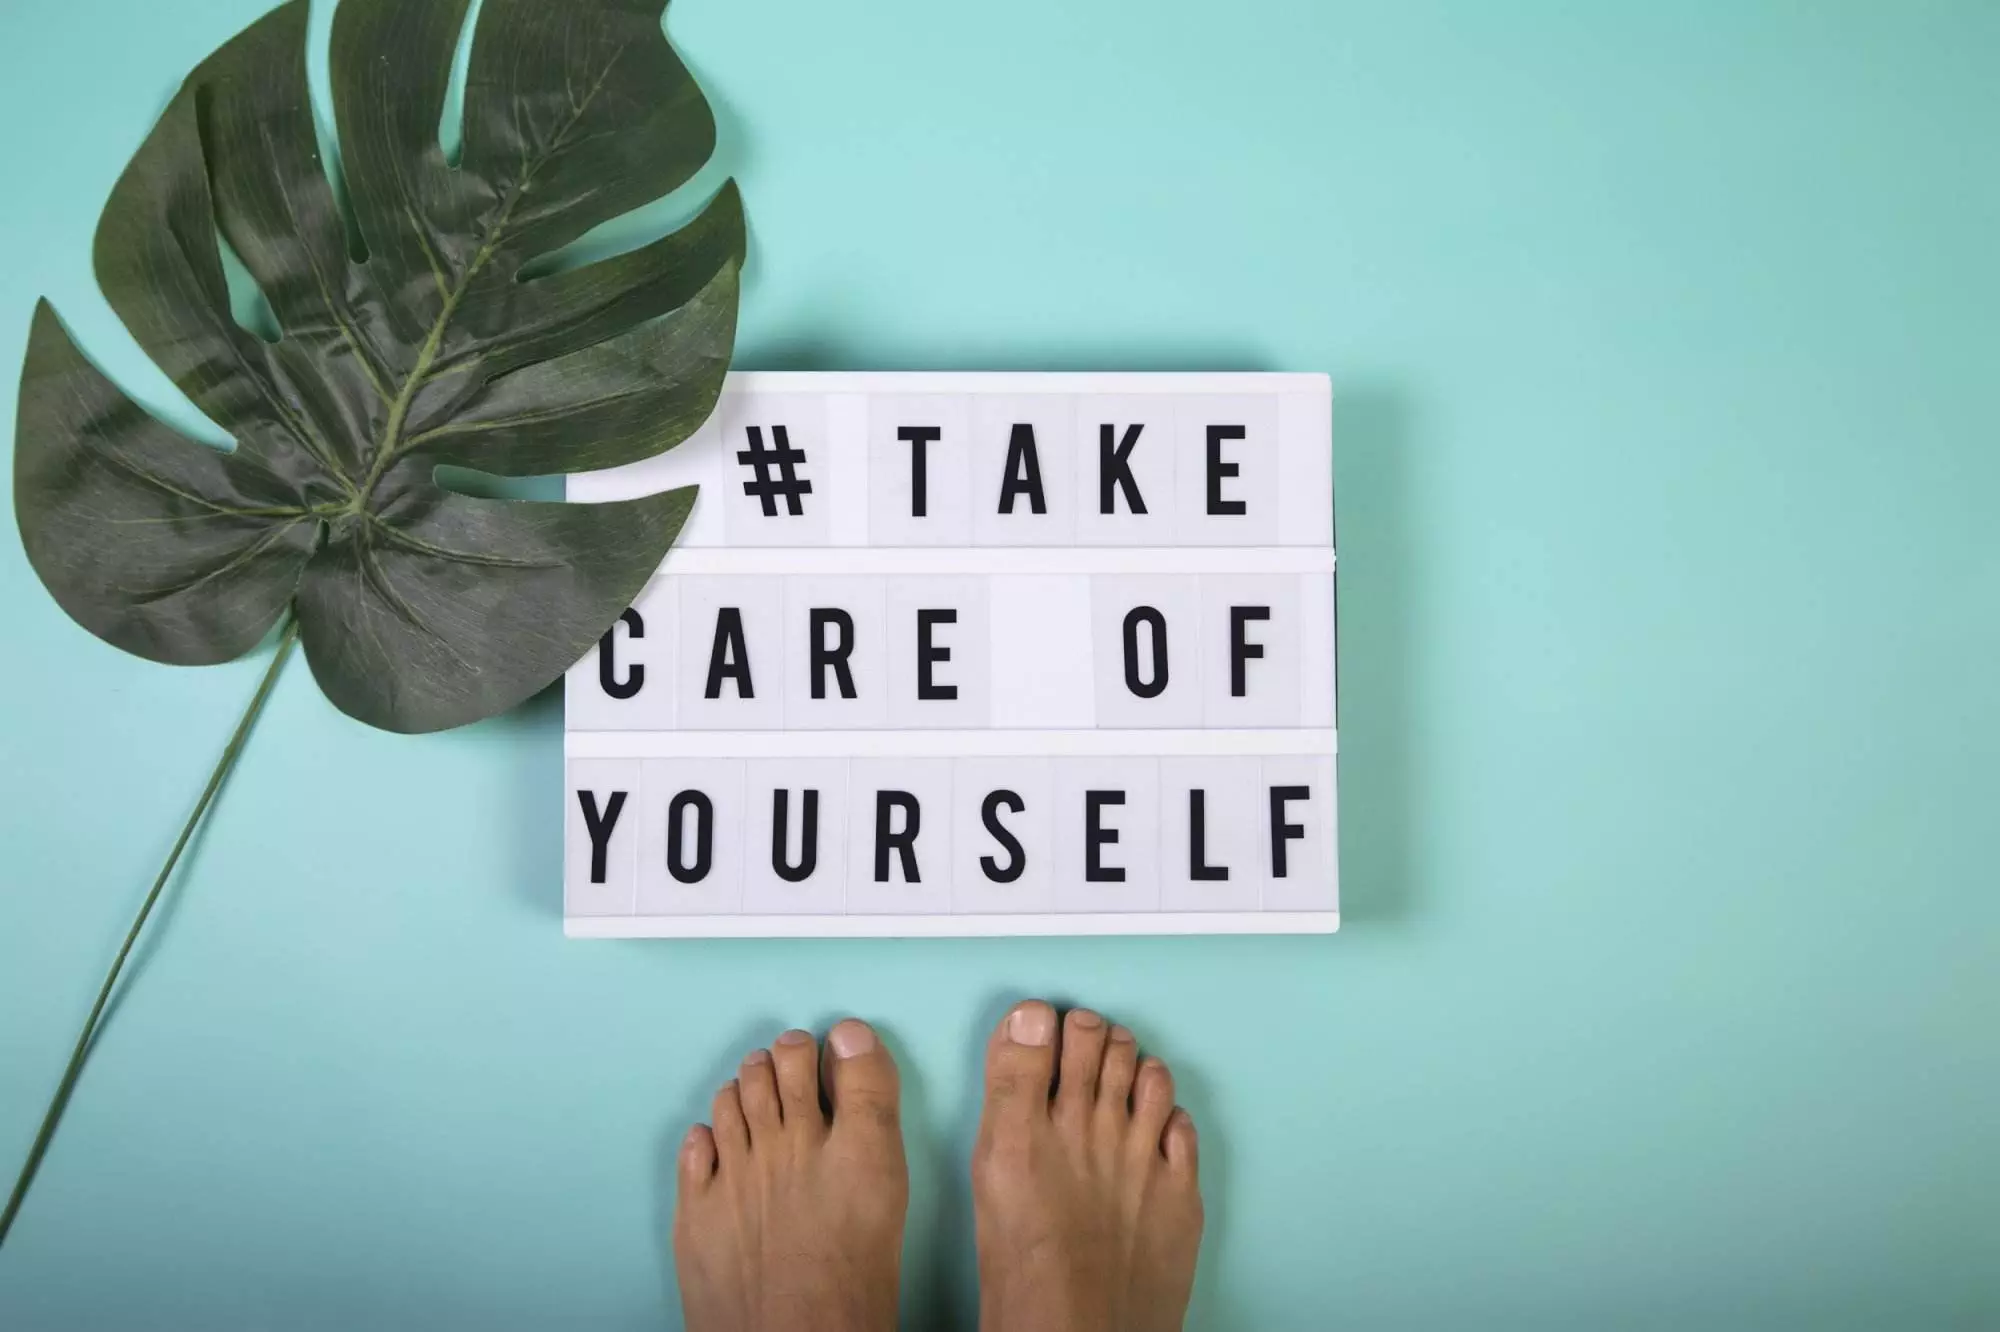 Message of Take care of yourself